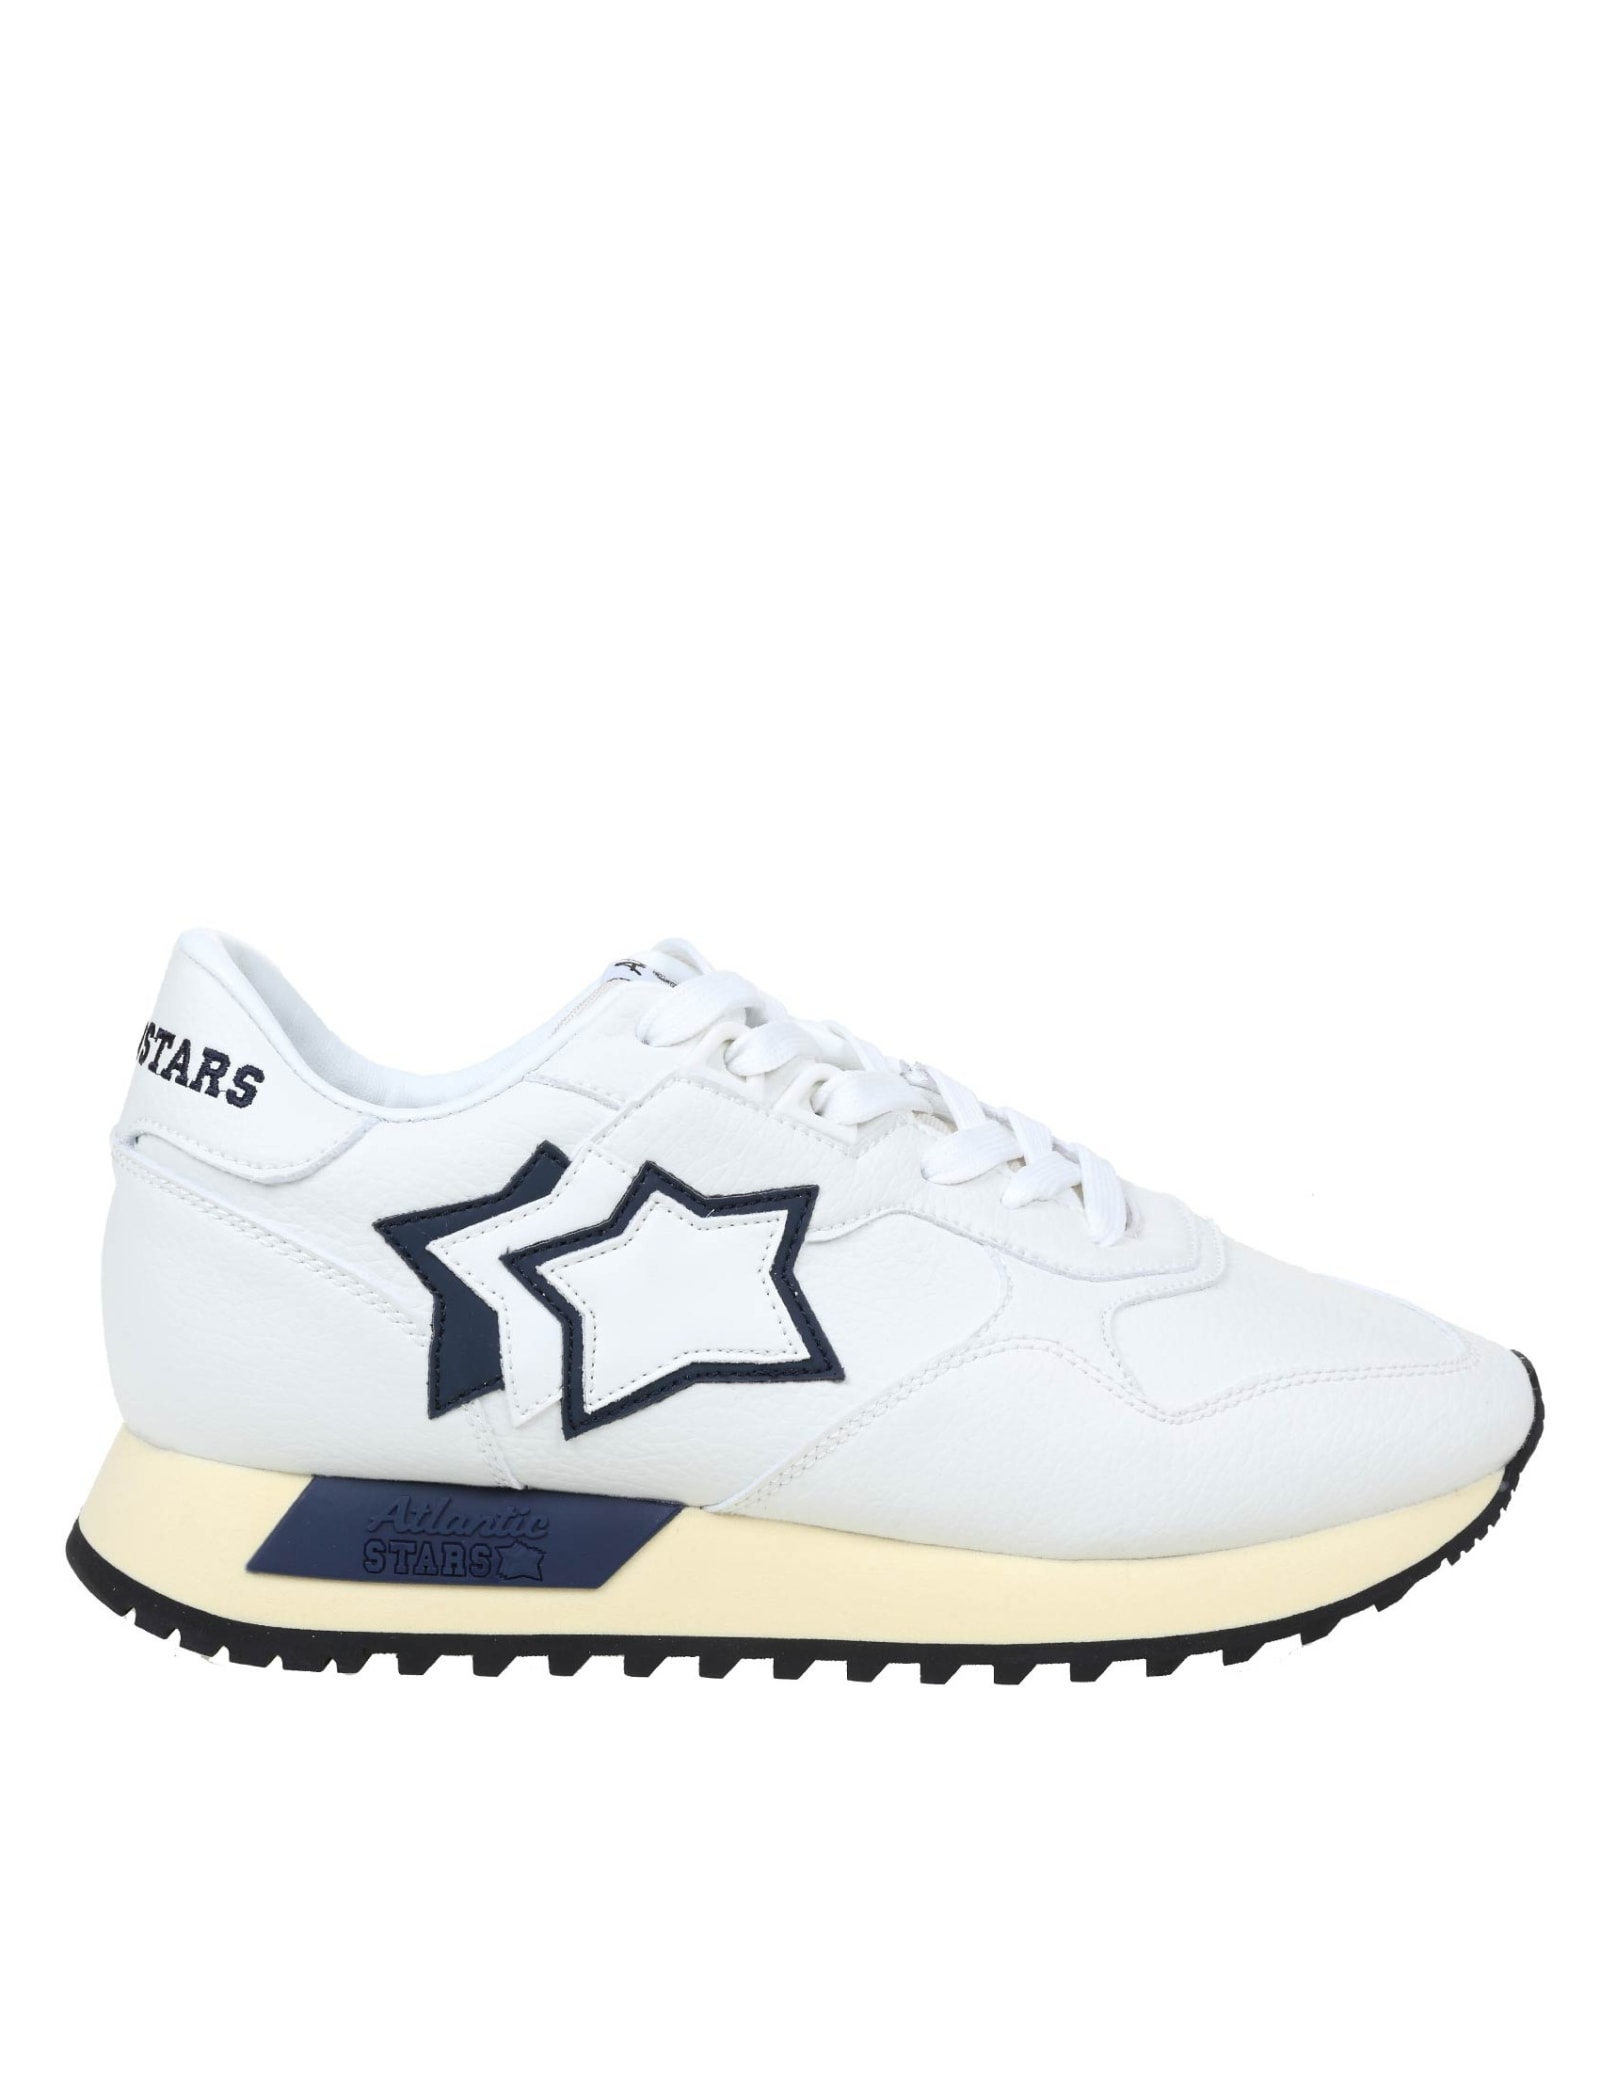 Atlantic Stars Draco Sneakers In Nylon And Suede Color White